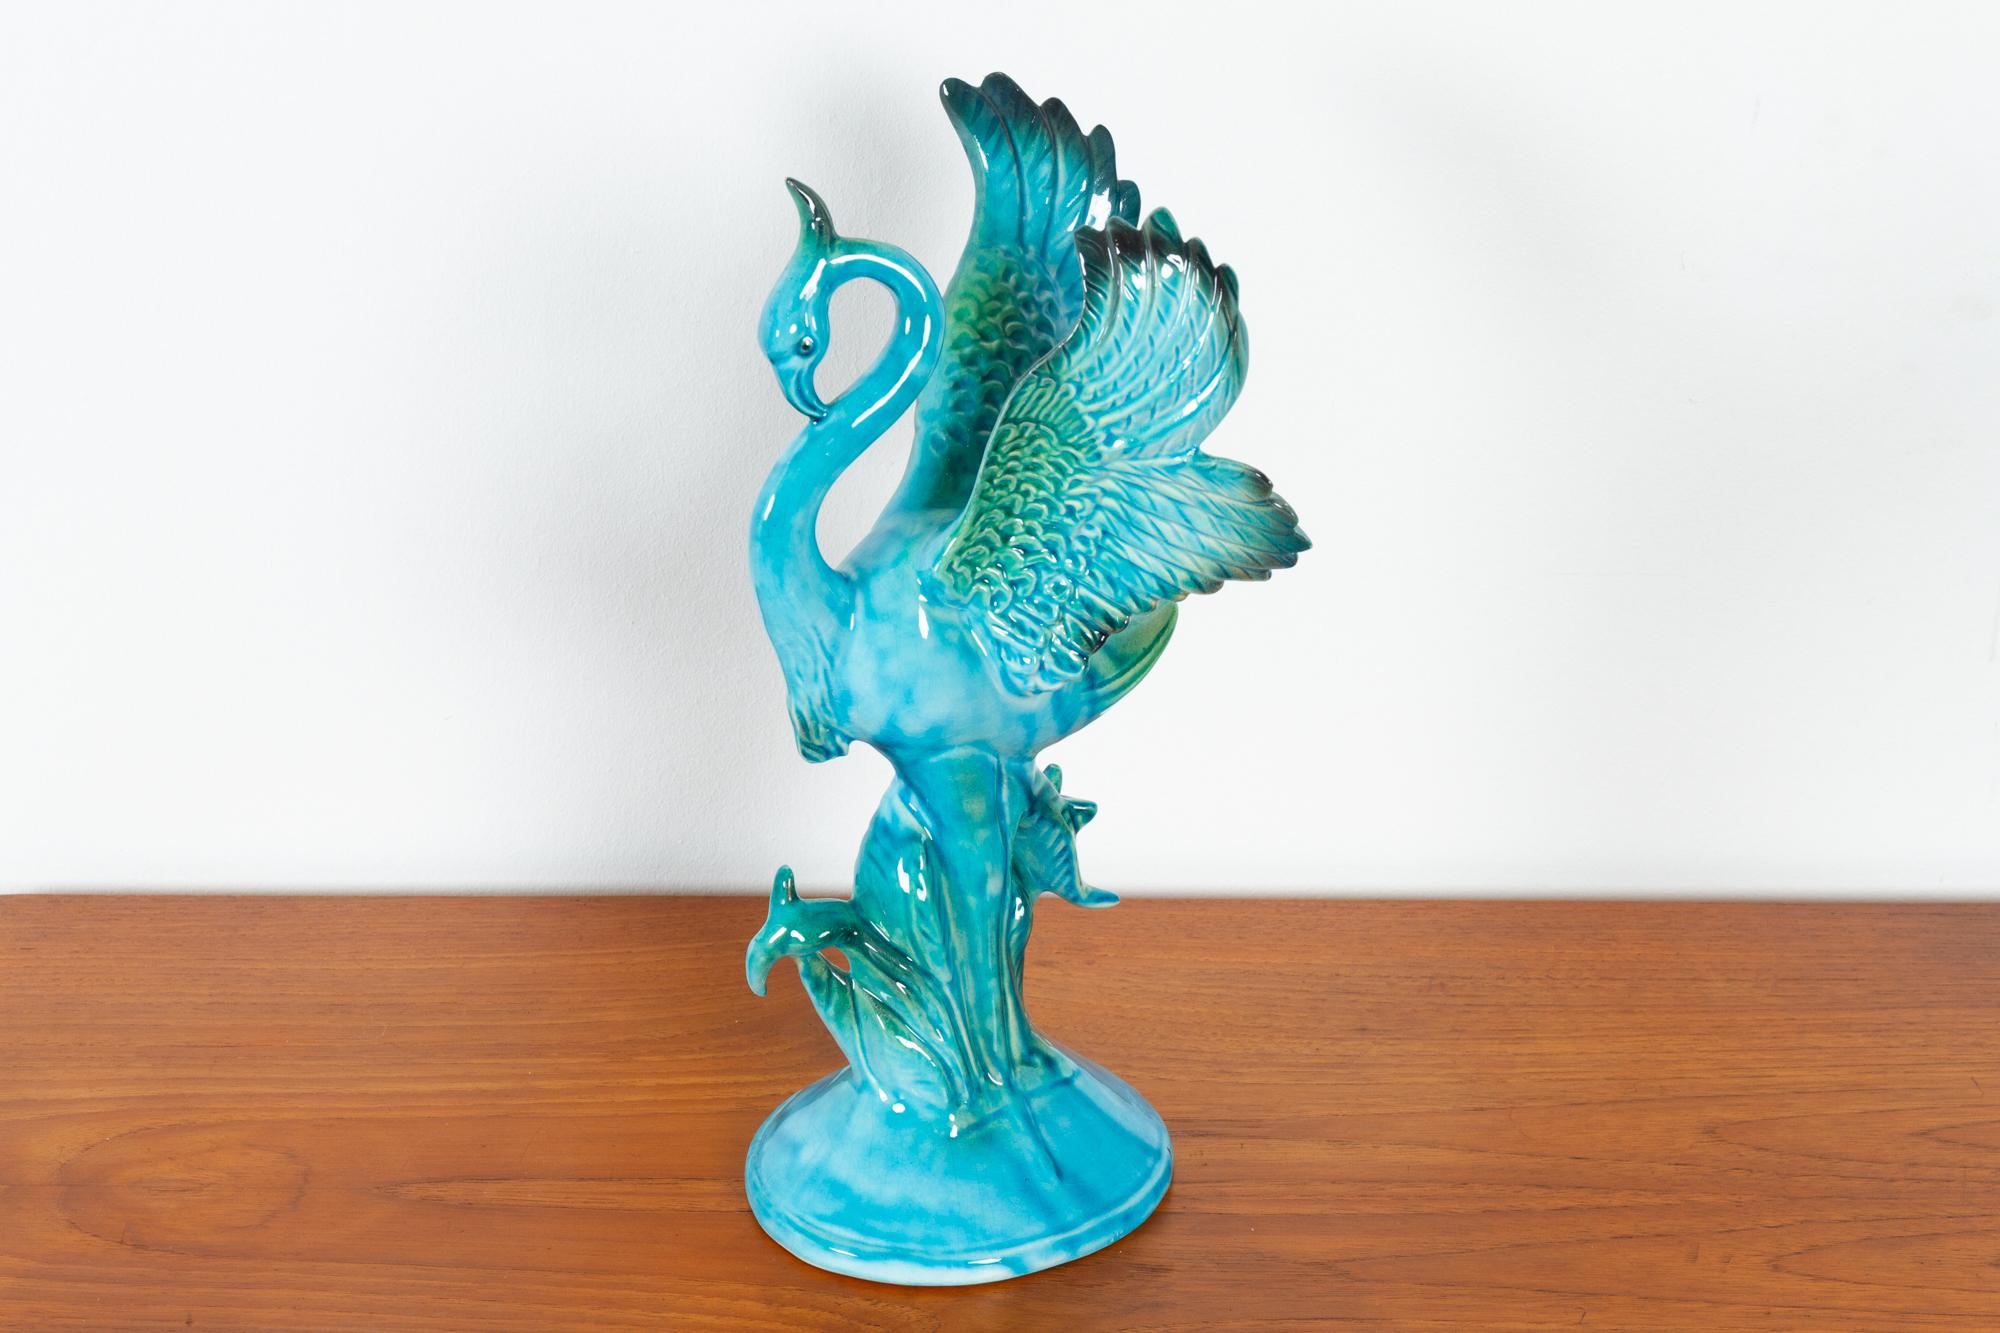 Vintage bird figurine by Jema Holland, 1960s
Porcelain figurine of a flamingo in stunning blue, green and turquoise glaze.
Measure: Height: 31 cm.
Good original condition with no damages.